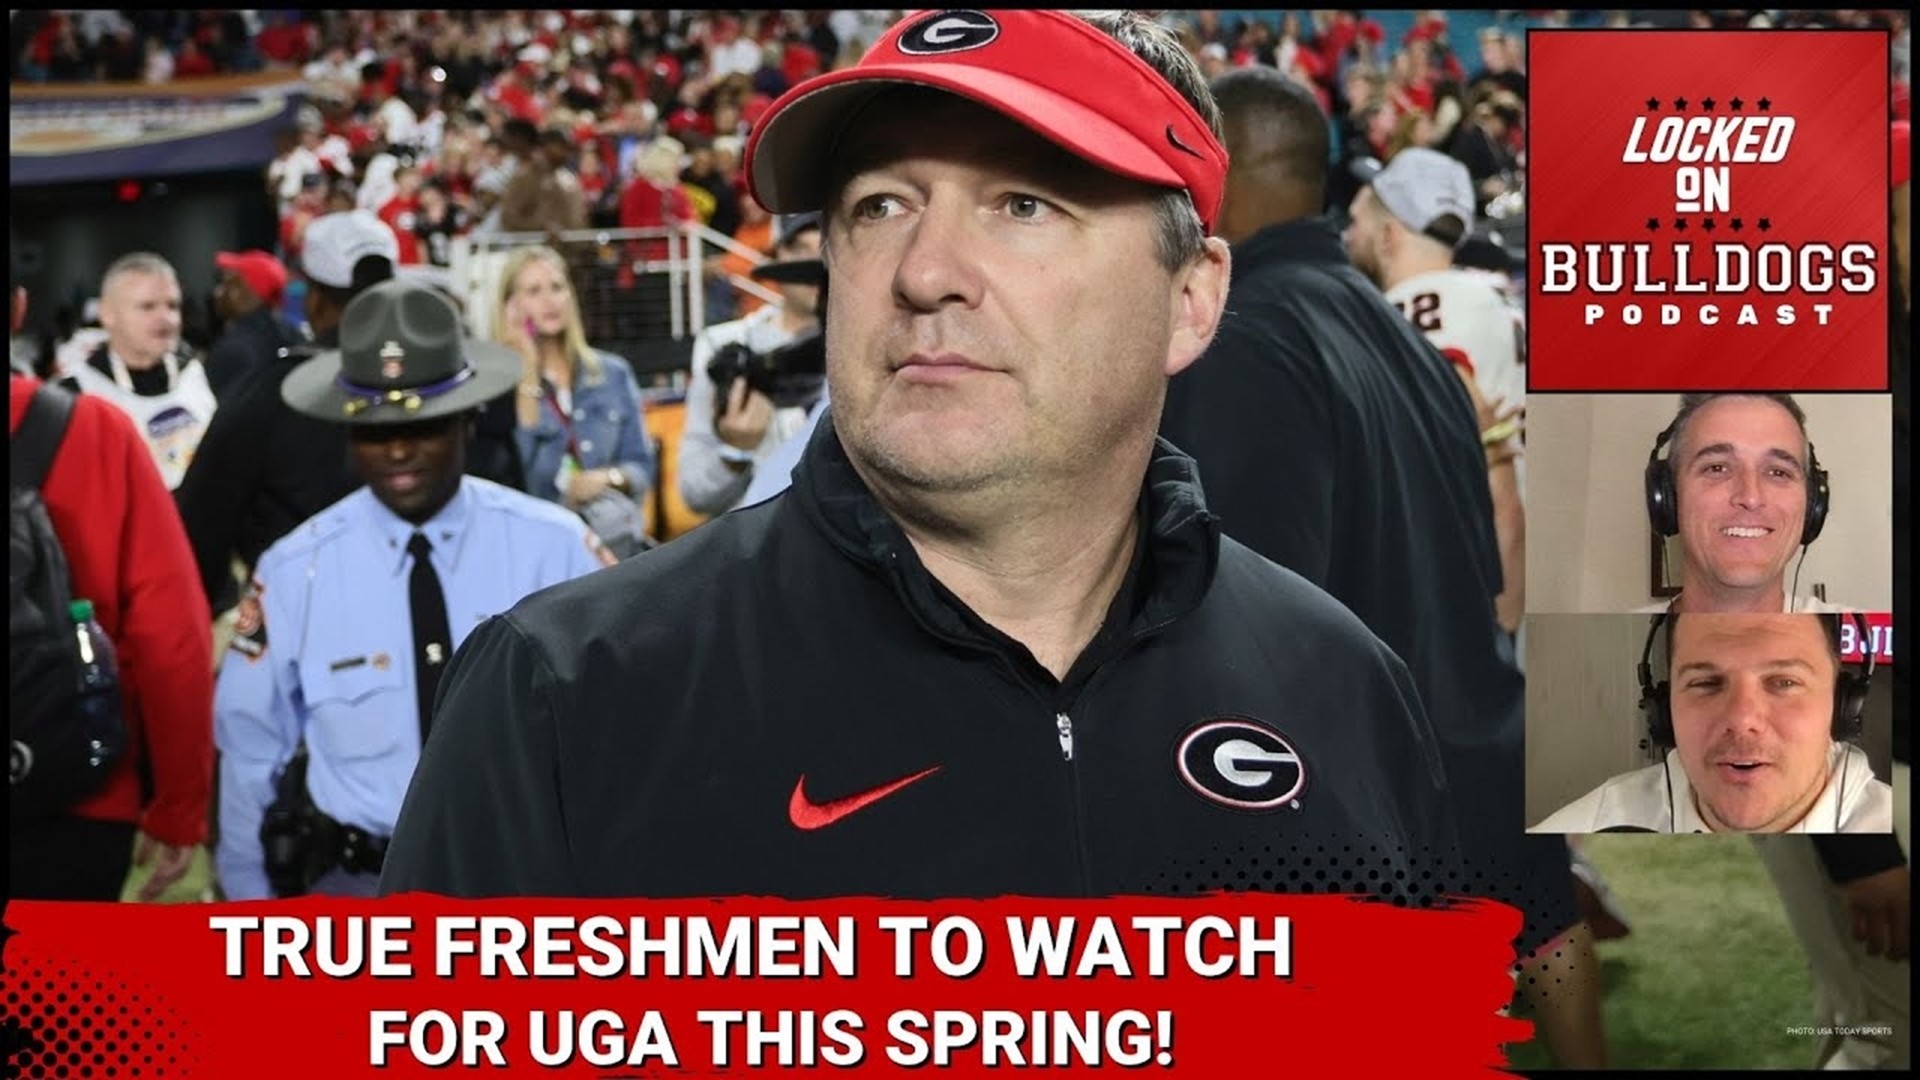 These guys are primed to make some serious noise for Georgia Football this Spring